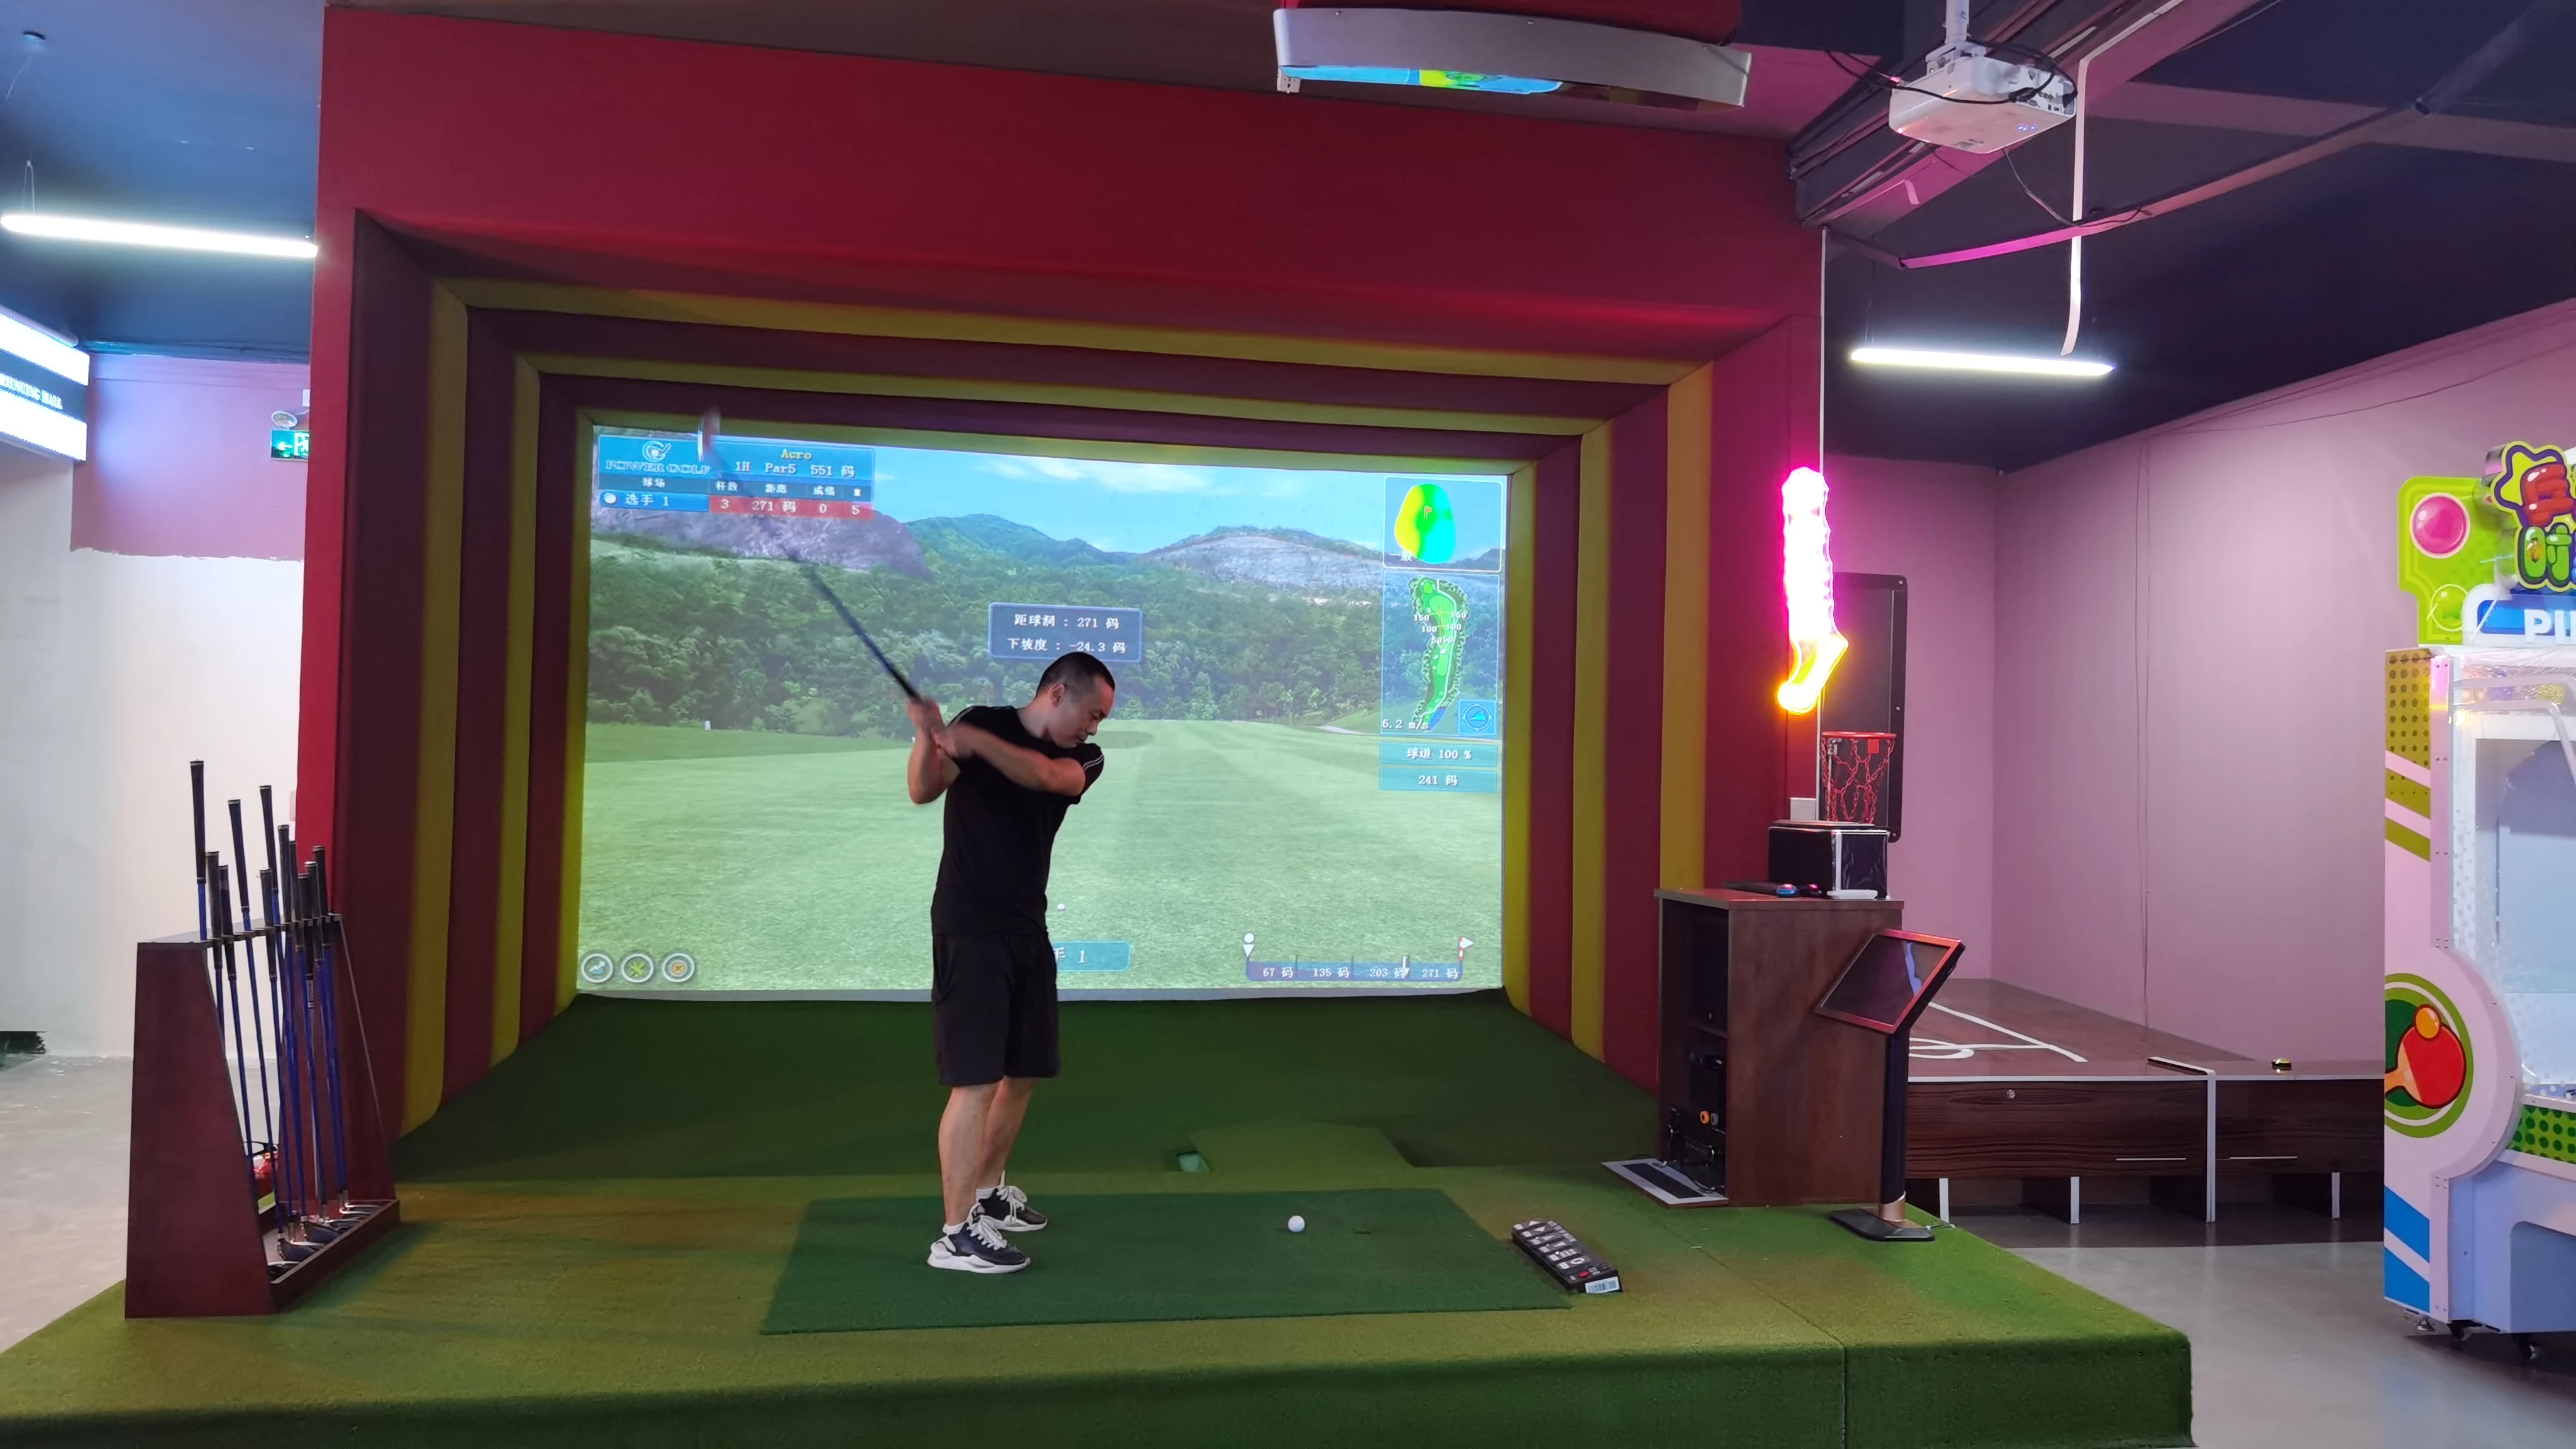 

Pgm Professional 3d Golf Simulator Complete System Training Auxiliary Indoor Projection Screen Golf Simulator